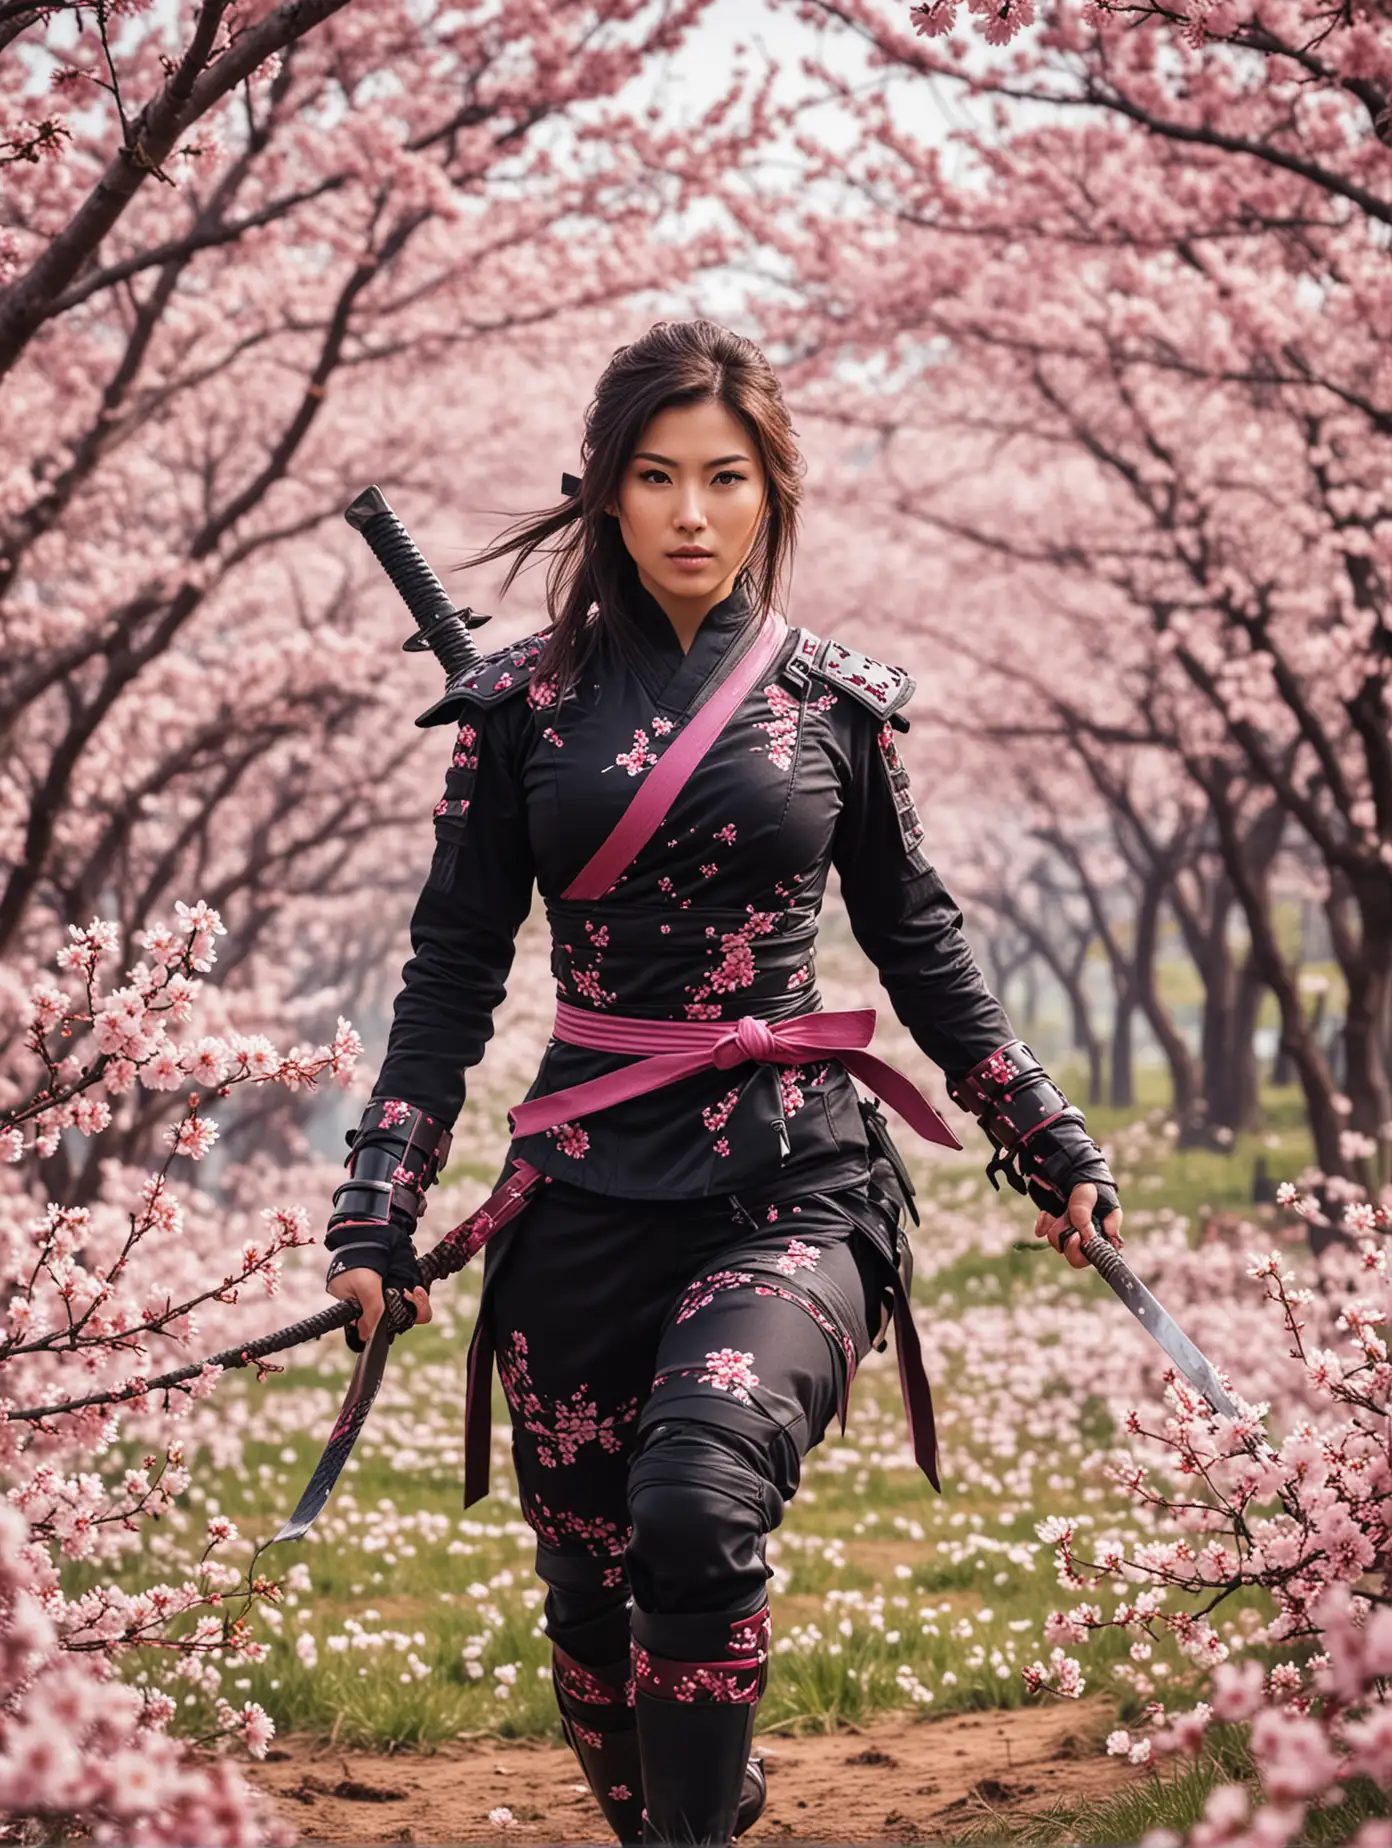 generate a 3840x2160 pixel image for iphone wallpaper of a beautiful female ninja warrior in a cherry blossom field